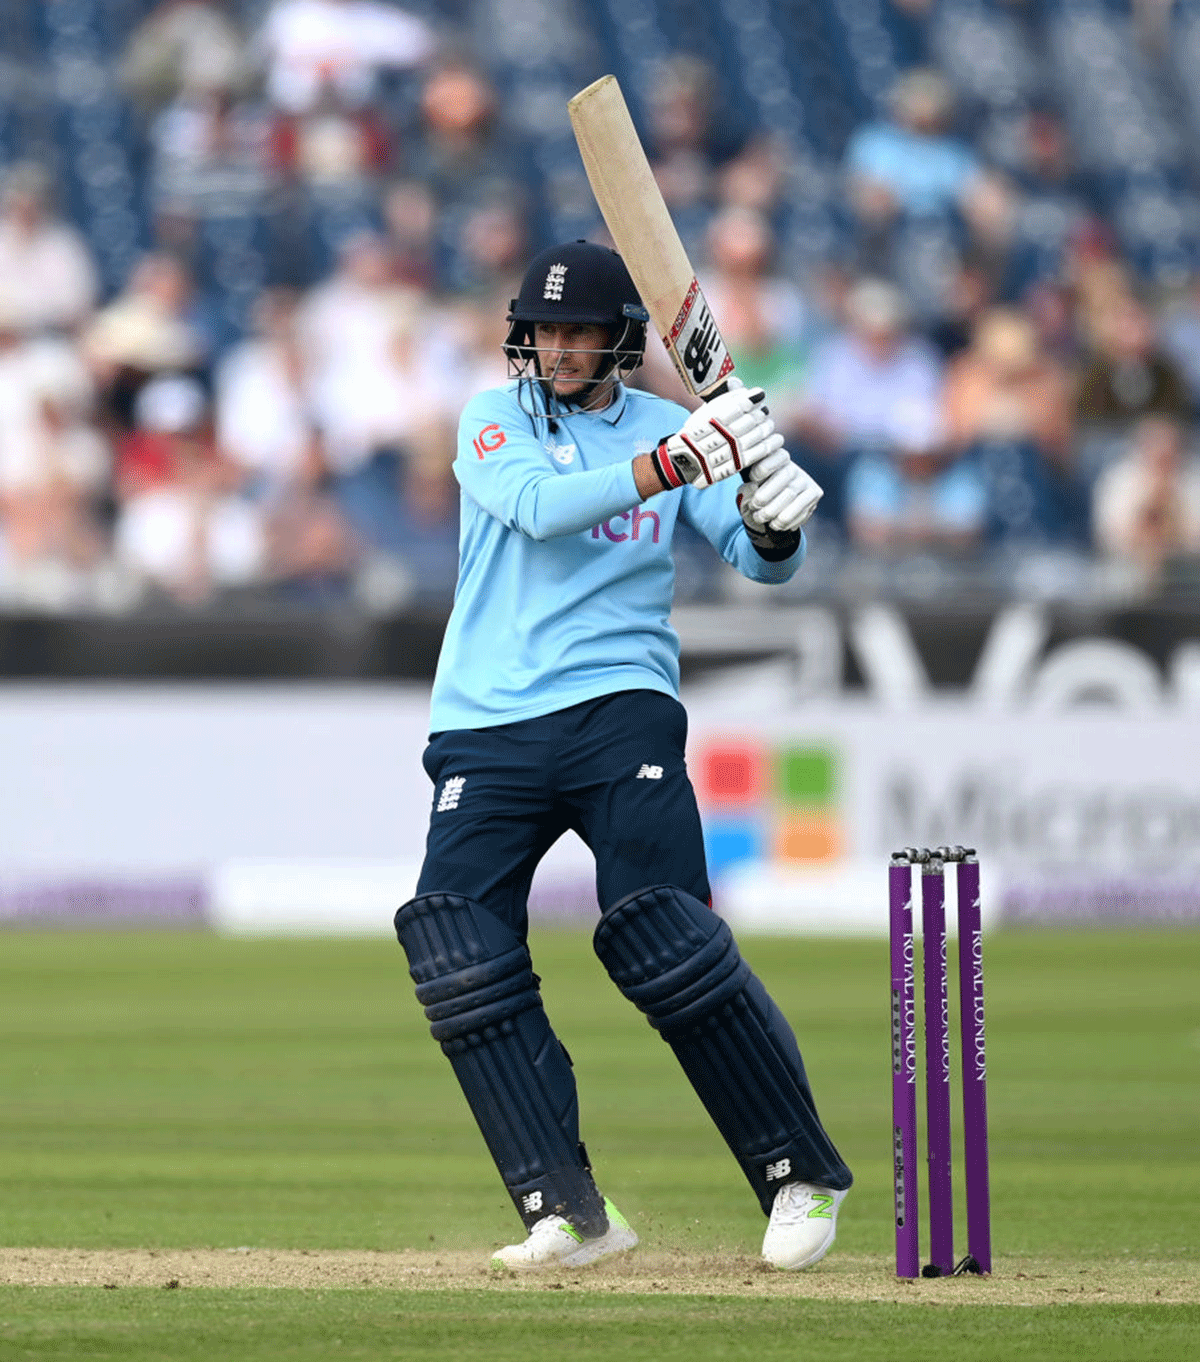 England's Joe Root bats en route an unbeaten half-century during the 1st One Day International against Sri Lanka at Emirates Riverside in Chester-le-Street, England, on Tuesday